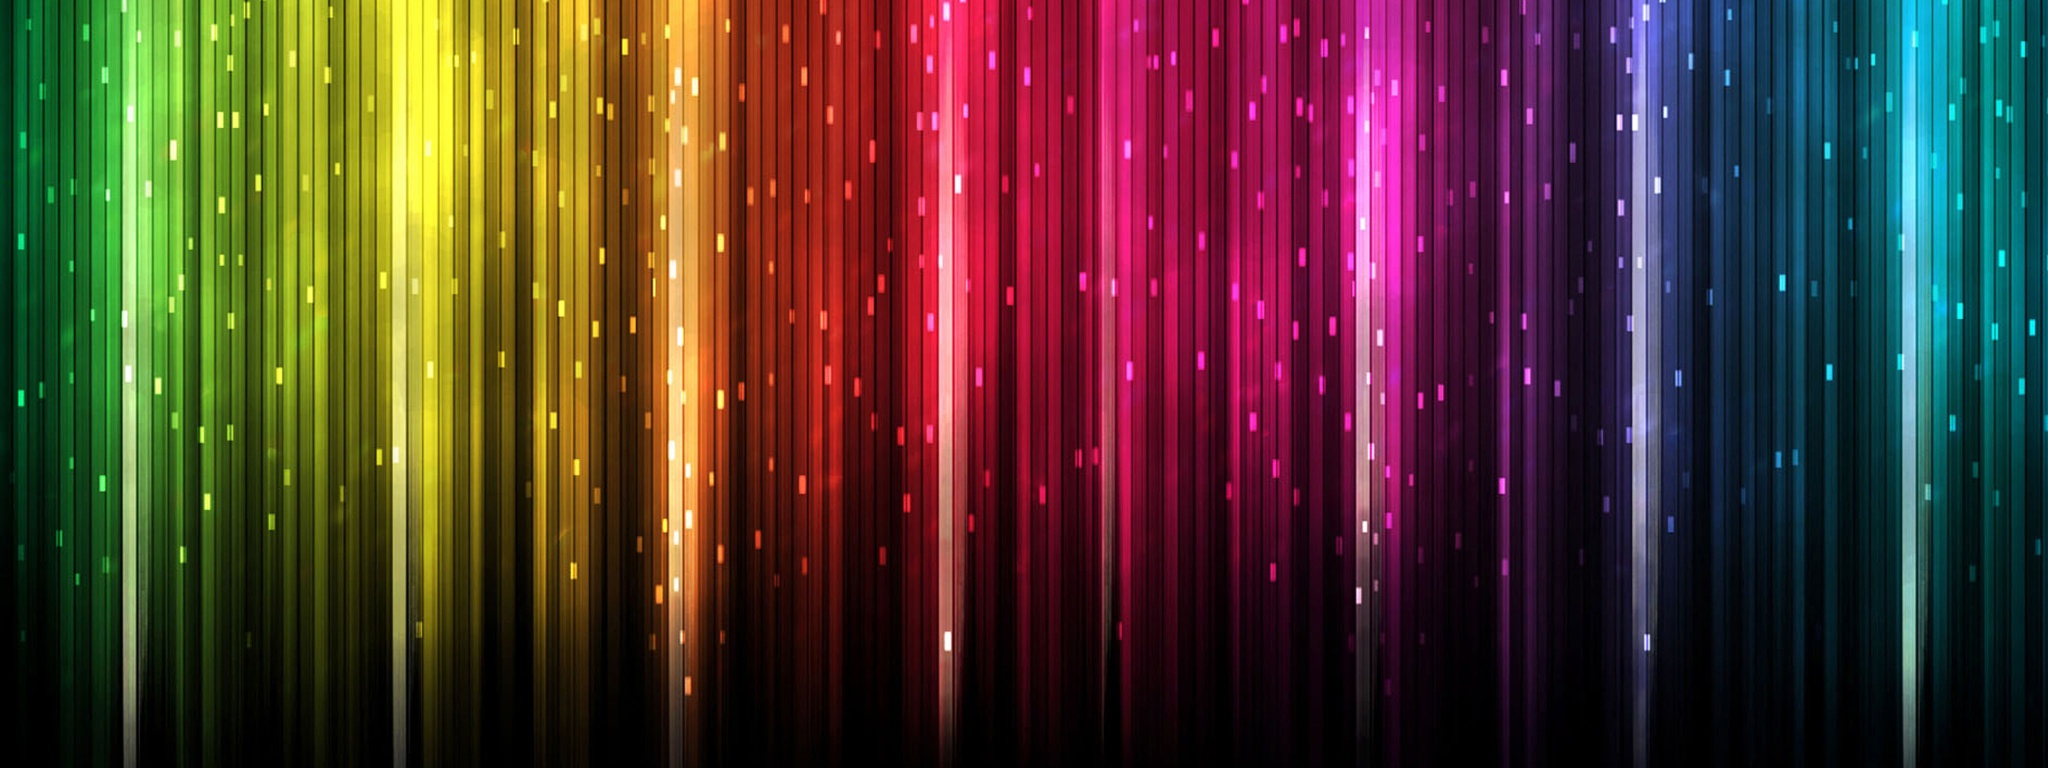  an amazingly colourful abstract image perfect for dual screens 2048x768